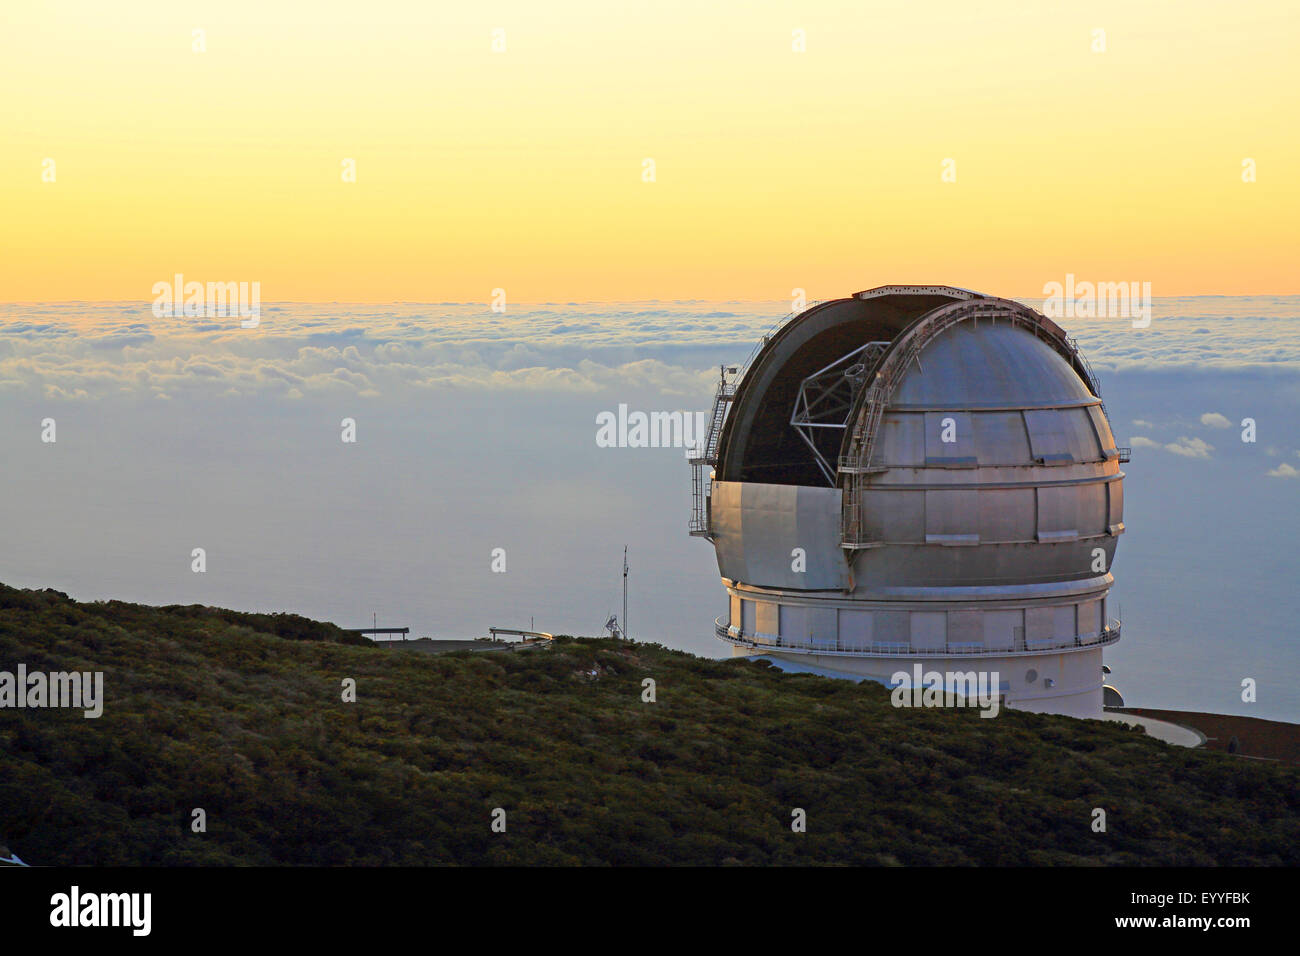 observatory at Roque de los Muchachos after sunset, Canary Islands, La Palma Stock Photo